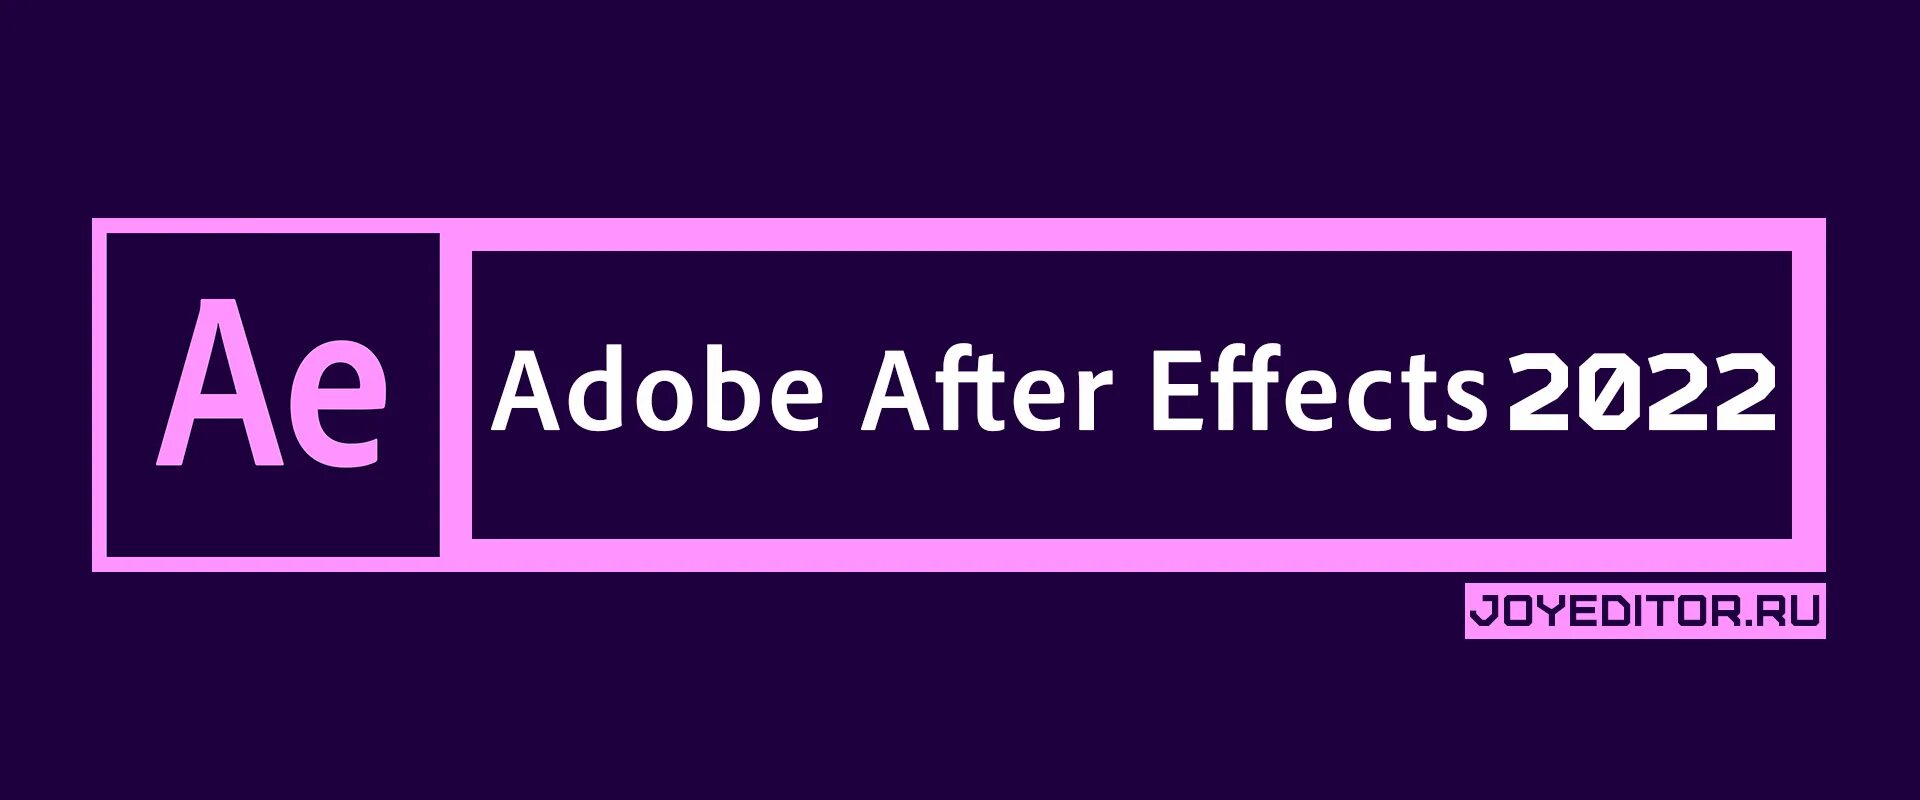 Adobe effects 2022. Adobe after Effects. Афтер эффект 2020. Adobe after Effects 2022. Adobe after Effects 2021.